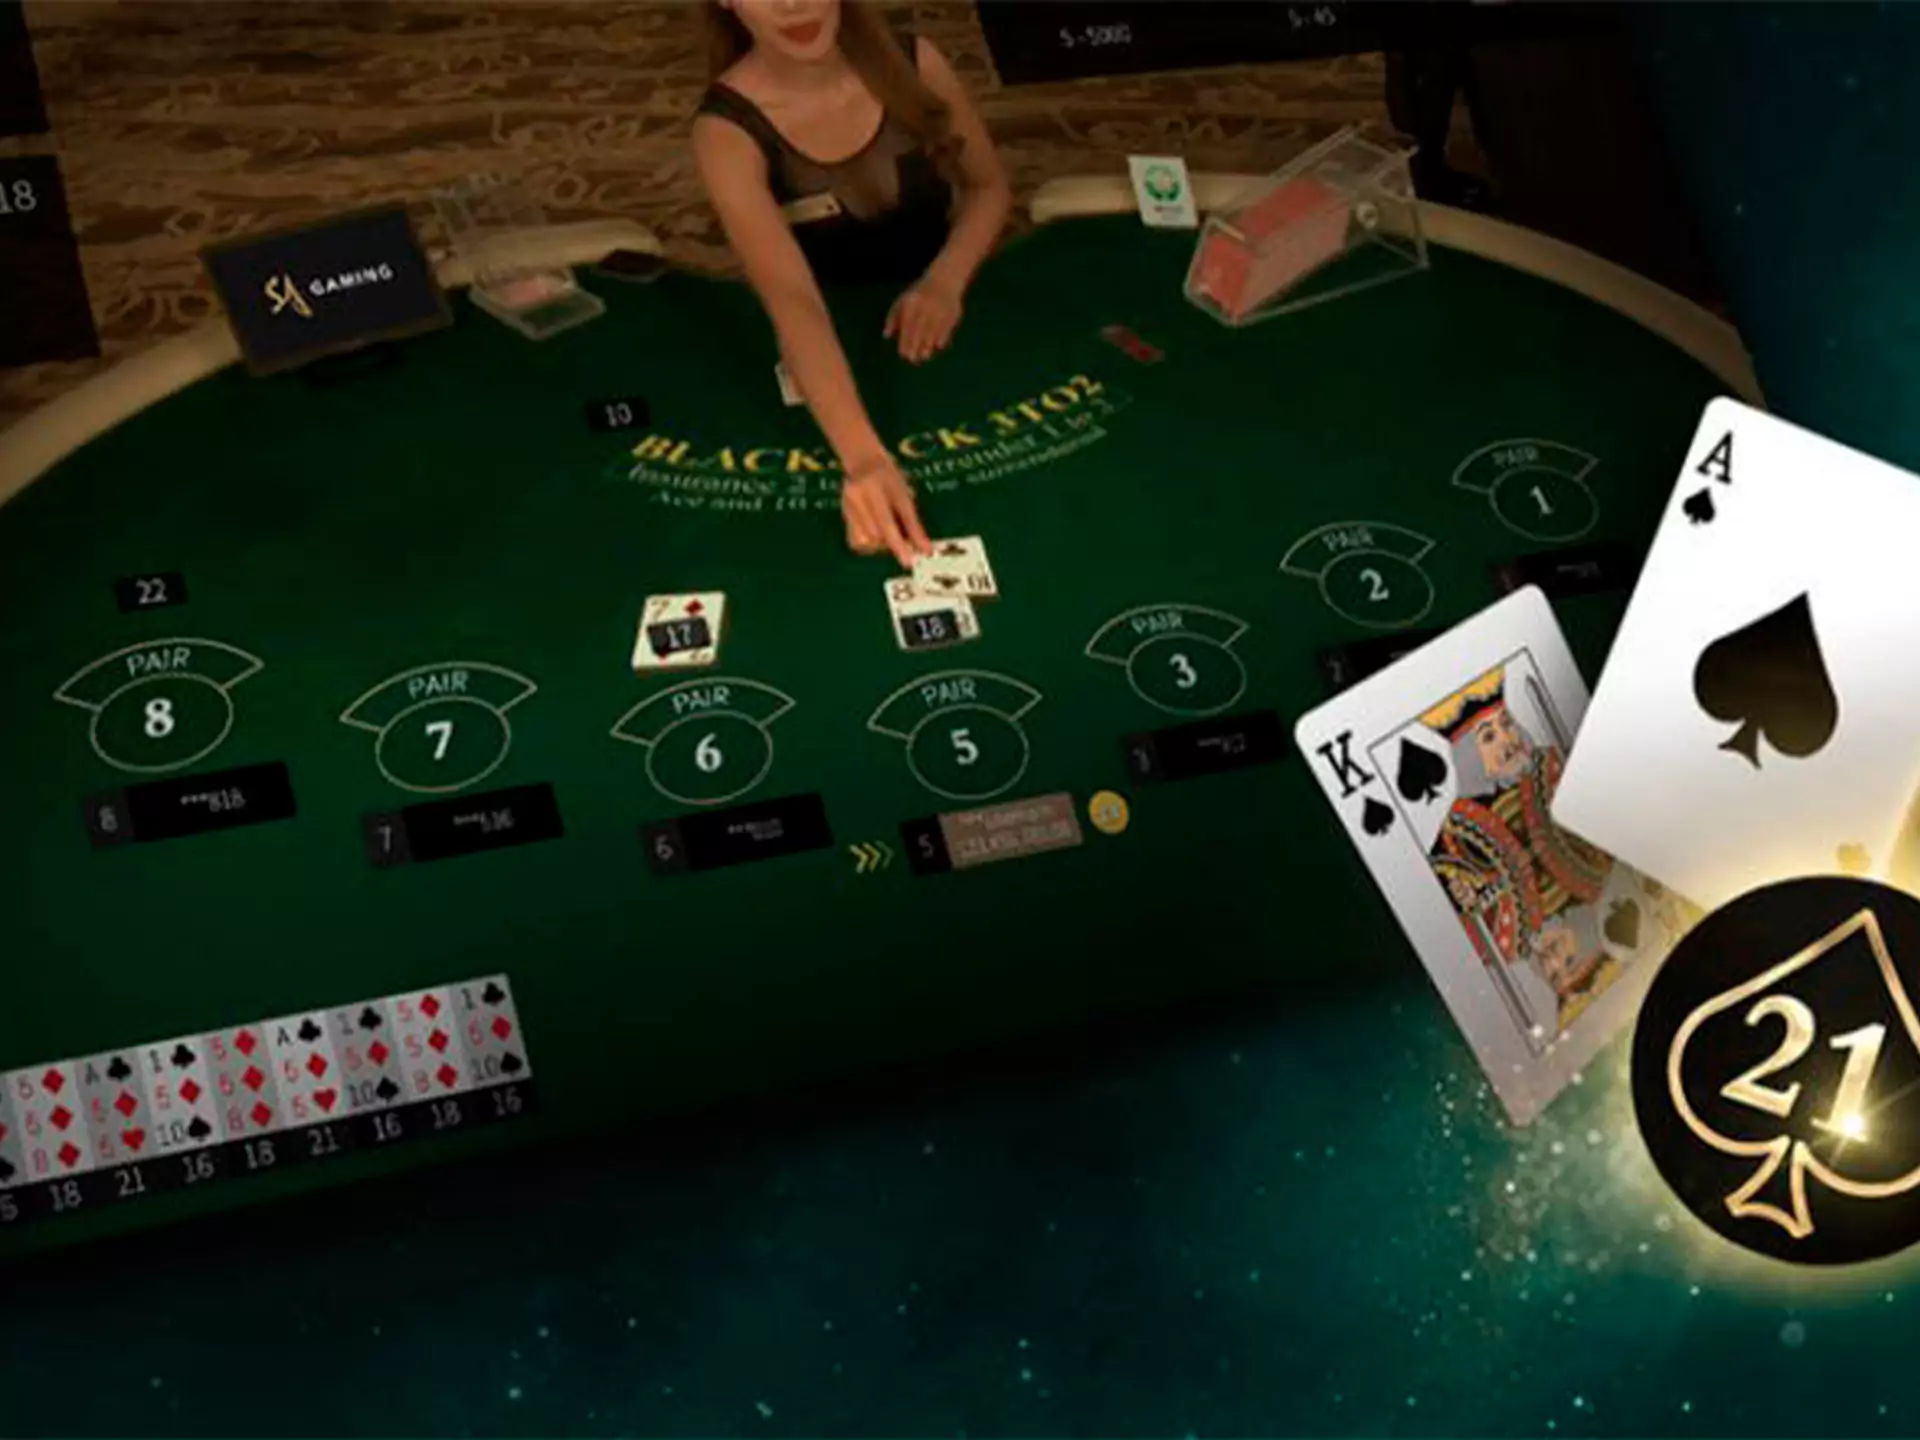 Blackjack is a funny and favorite game for many gamblers.